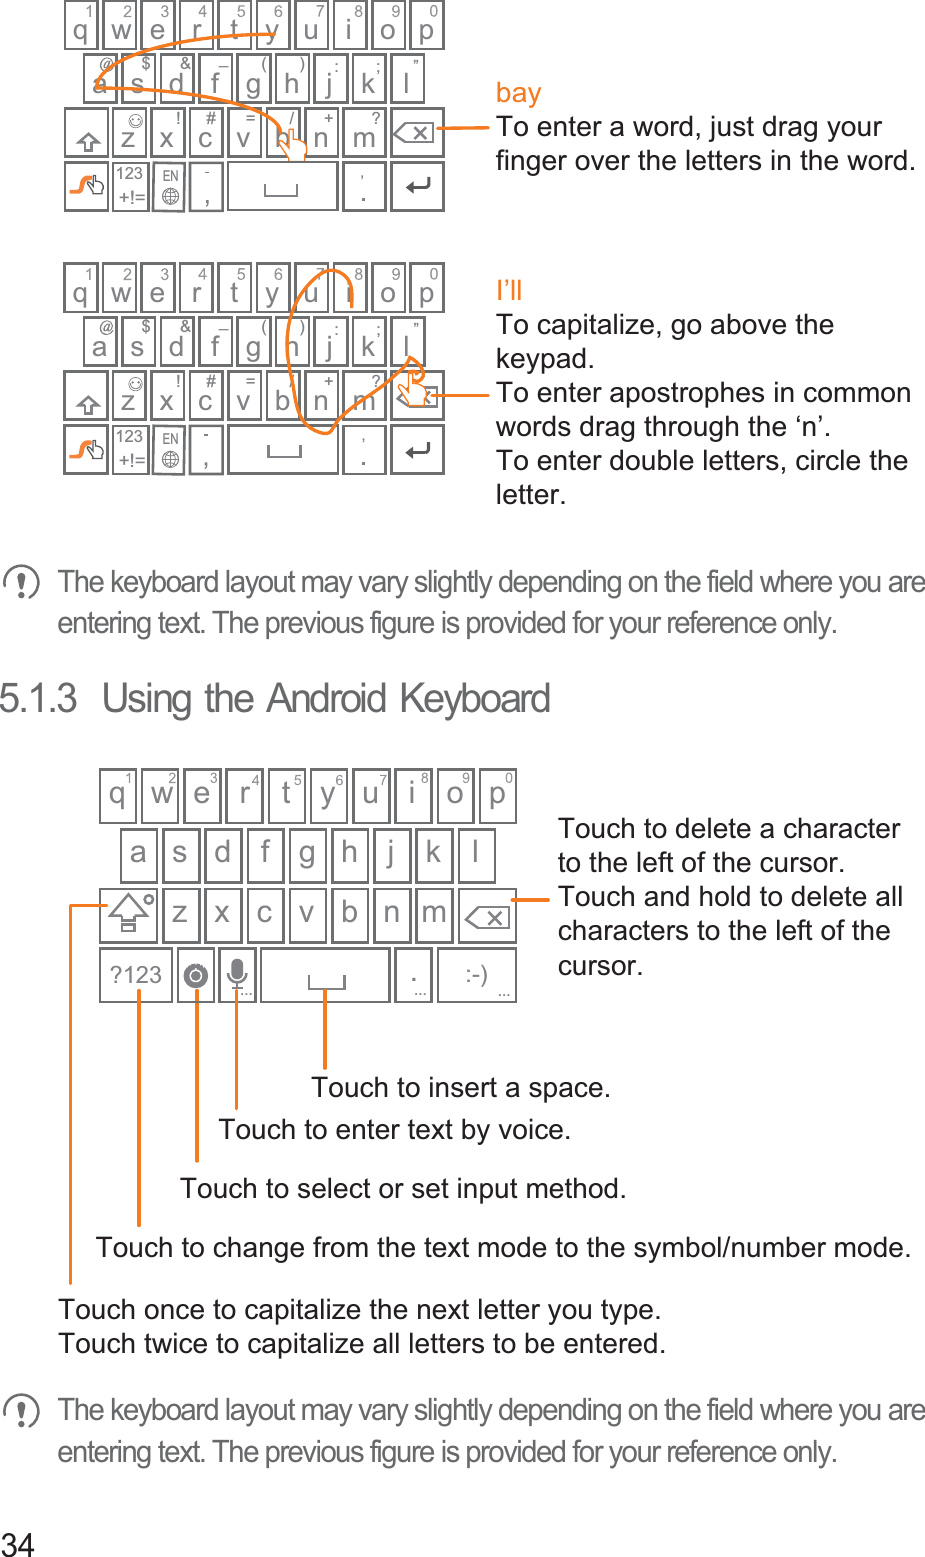 34The keyboard layout may vary slightly depending on the field where you are entering text. The previous figure is provided for your reference only.5.1.3  Using the Android KeyboardThe keyboard layout may vary slightly depending on the field where you are entering text. The previous figure is provided for your reference only.q w e#_(&amp;!/?$:;”)r t y u i o pa s d f g h j kz x c v b n m+!=lEN=+123q w e#_(&amp;!/?$:;”)r t y u i o pa s d f g h j kz x c v b n m+!=lEN=+123bayTo enter a word, just drag your finger over the letters in the word.I’llTo capitalize, go above the keypad.To enter apostrophes in common words drag through the ‘n’.To enter double letters, circle theletter.q w e r t y u i o pa s d f g h j kz x c v b n m.?123lTouch once to capitalize the next letter you type. Touch twice to capitalize all letters to be entered.Touch to change from the text mode to the symbol/number mode. Touch to enter text by voice.Touch to insert a space.Touch to delete a characterto the left of the cursor. Touch and hold to delete all characters to the left of the cursor.......Touch to select or set input method.:-)...